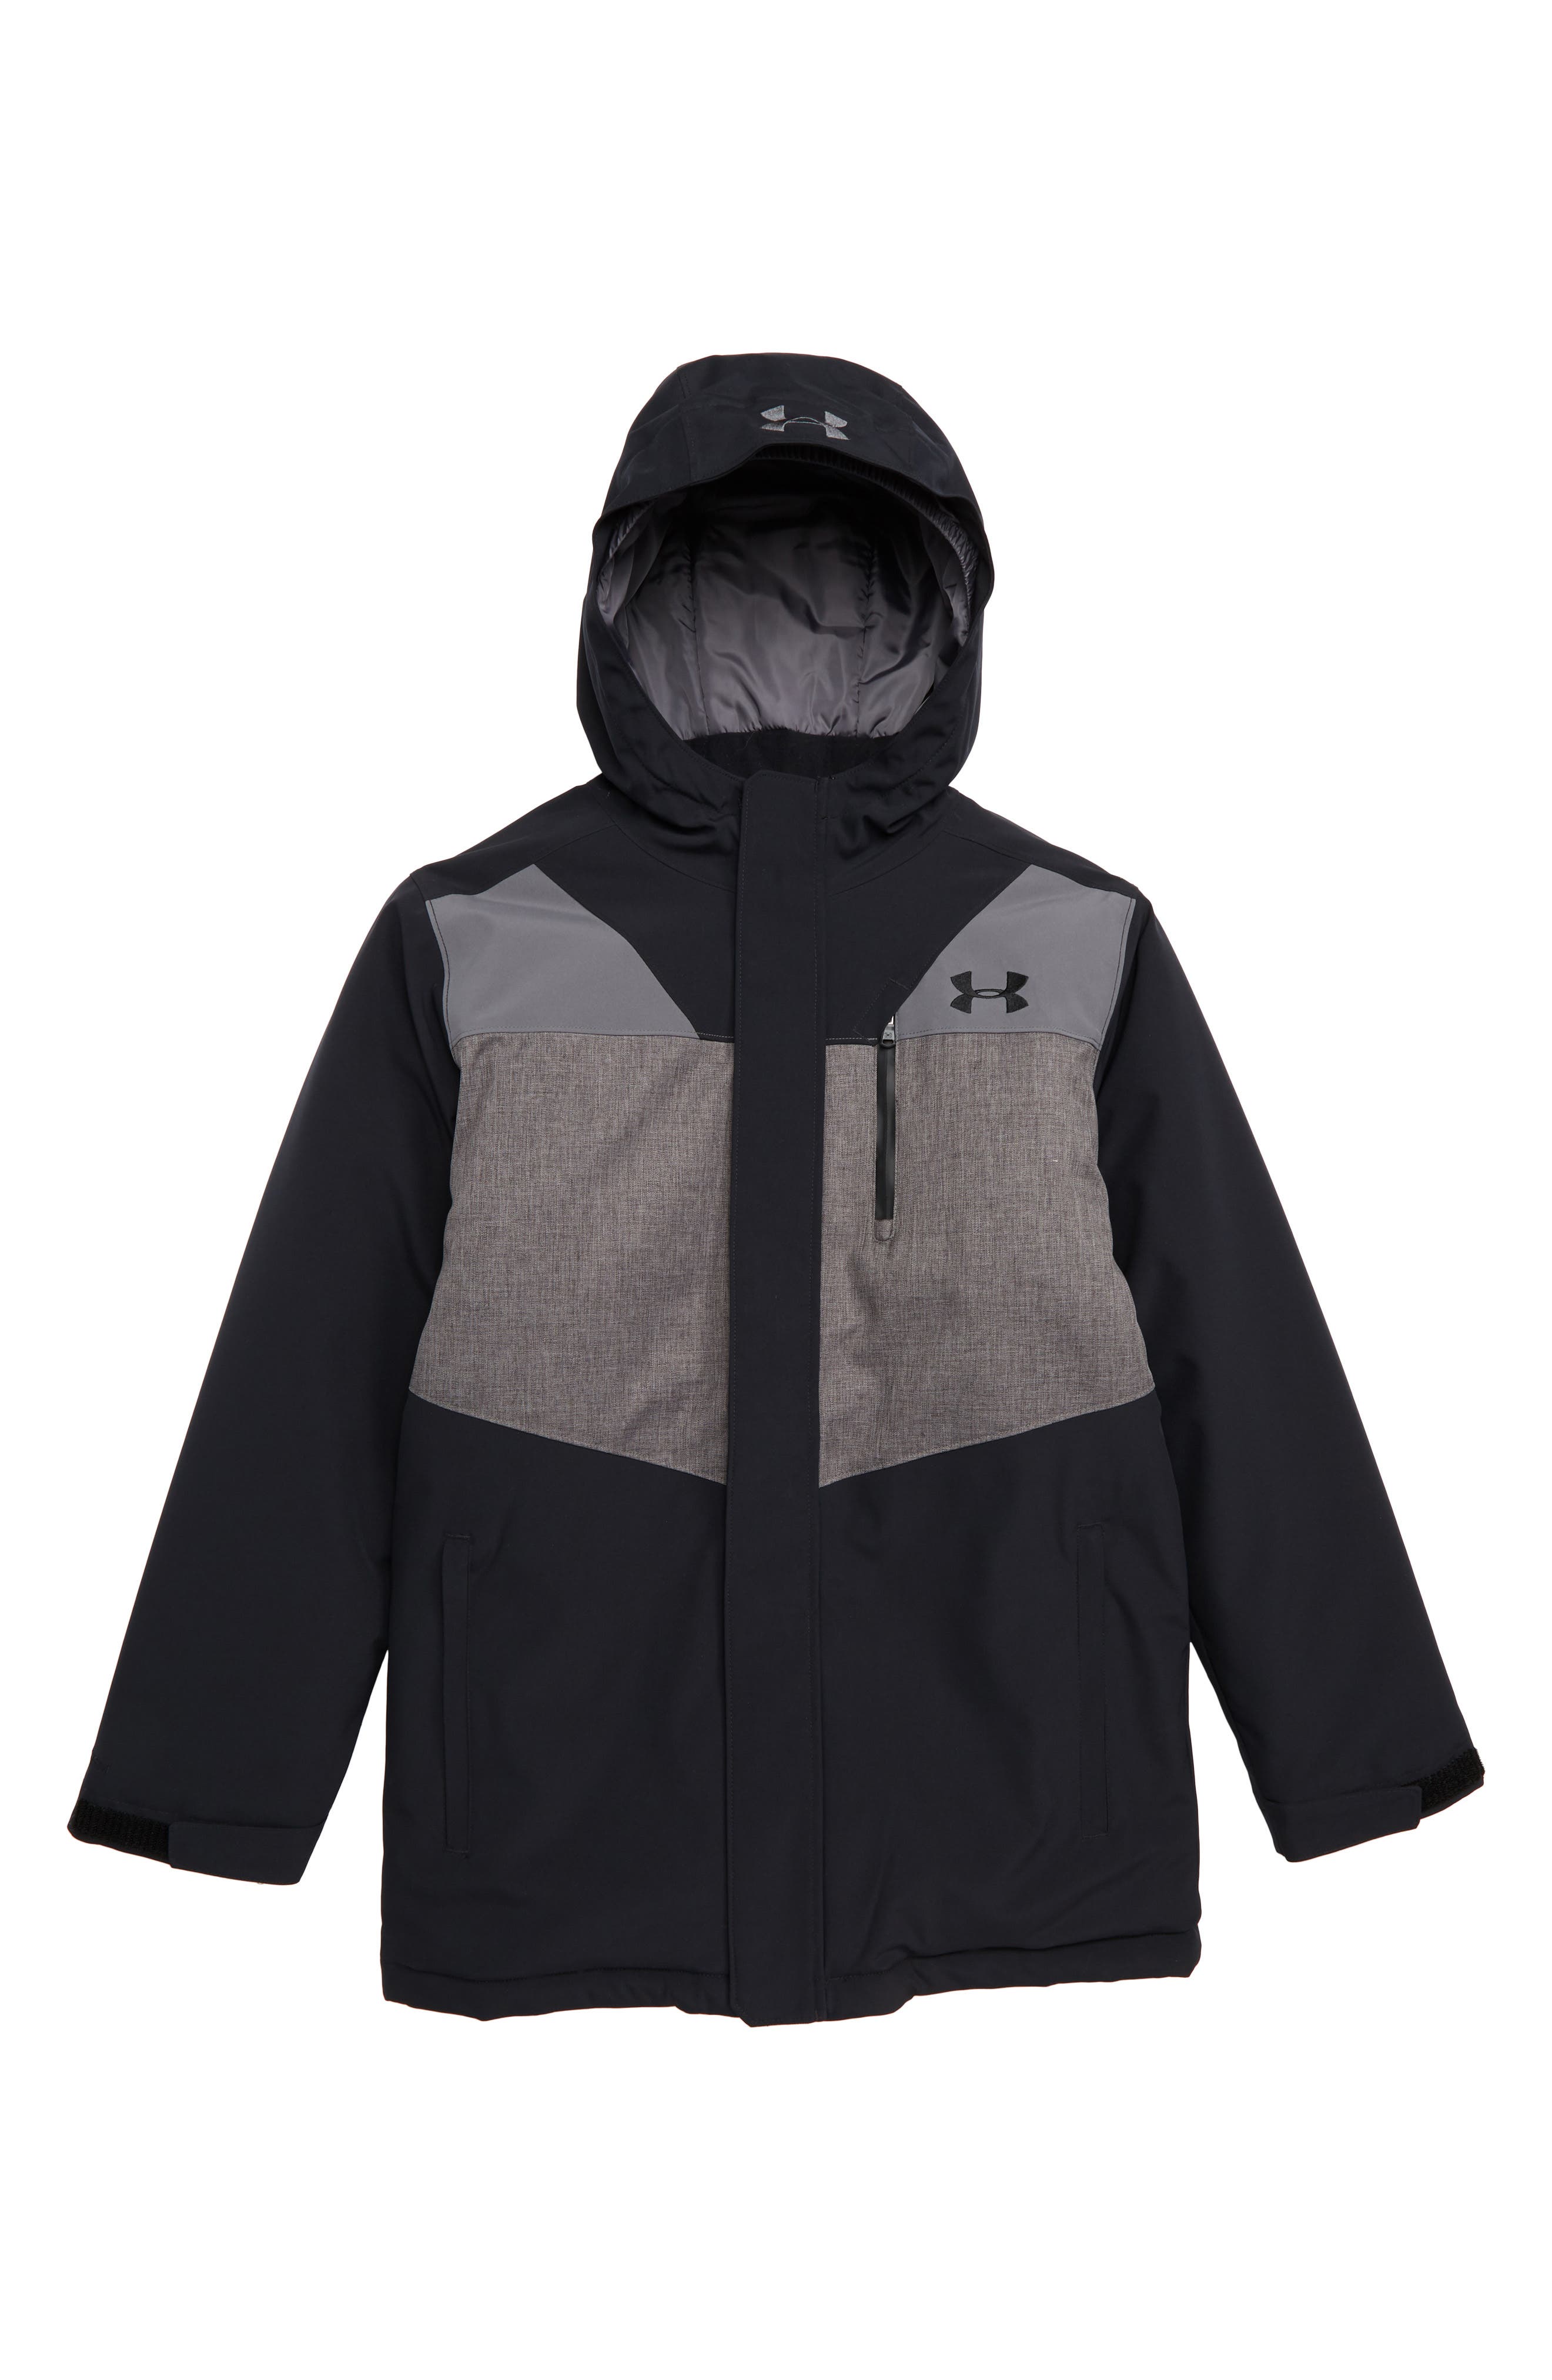 Under Armour Thunder Waterproof Hooded 